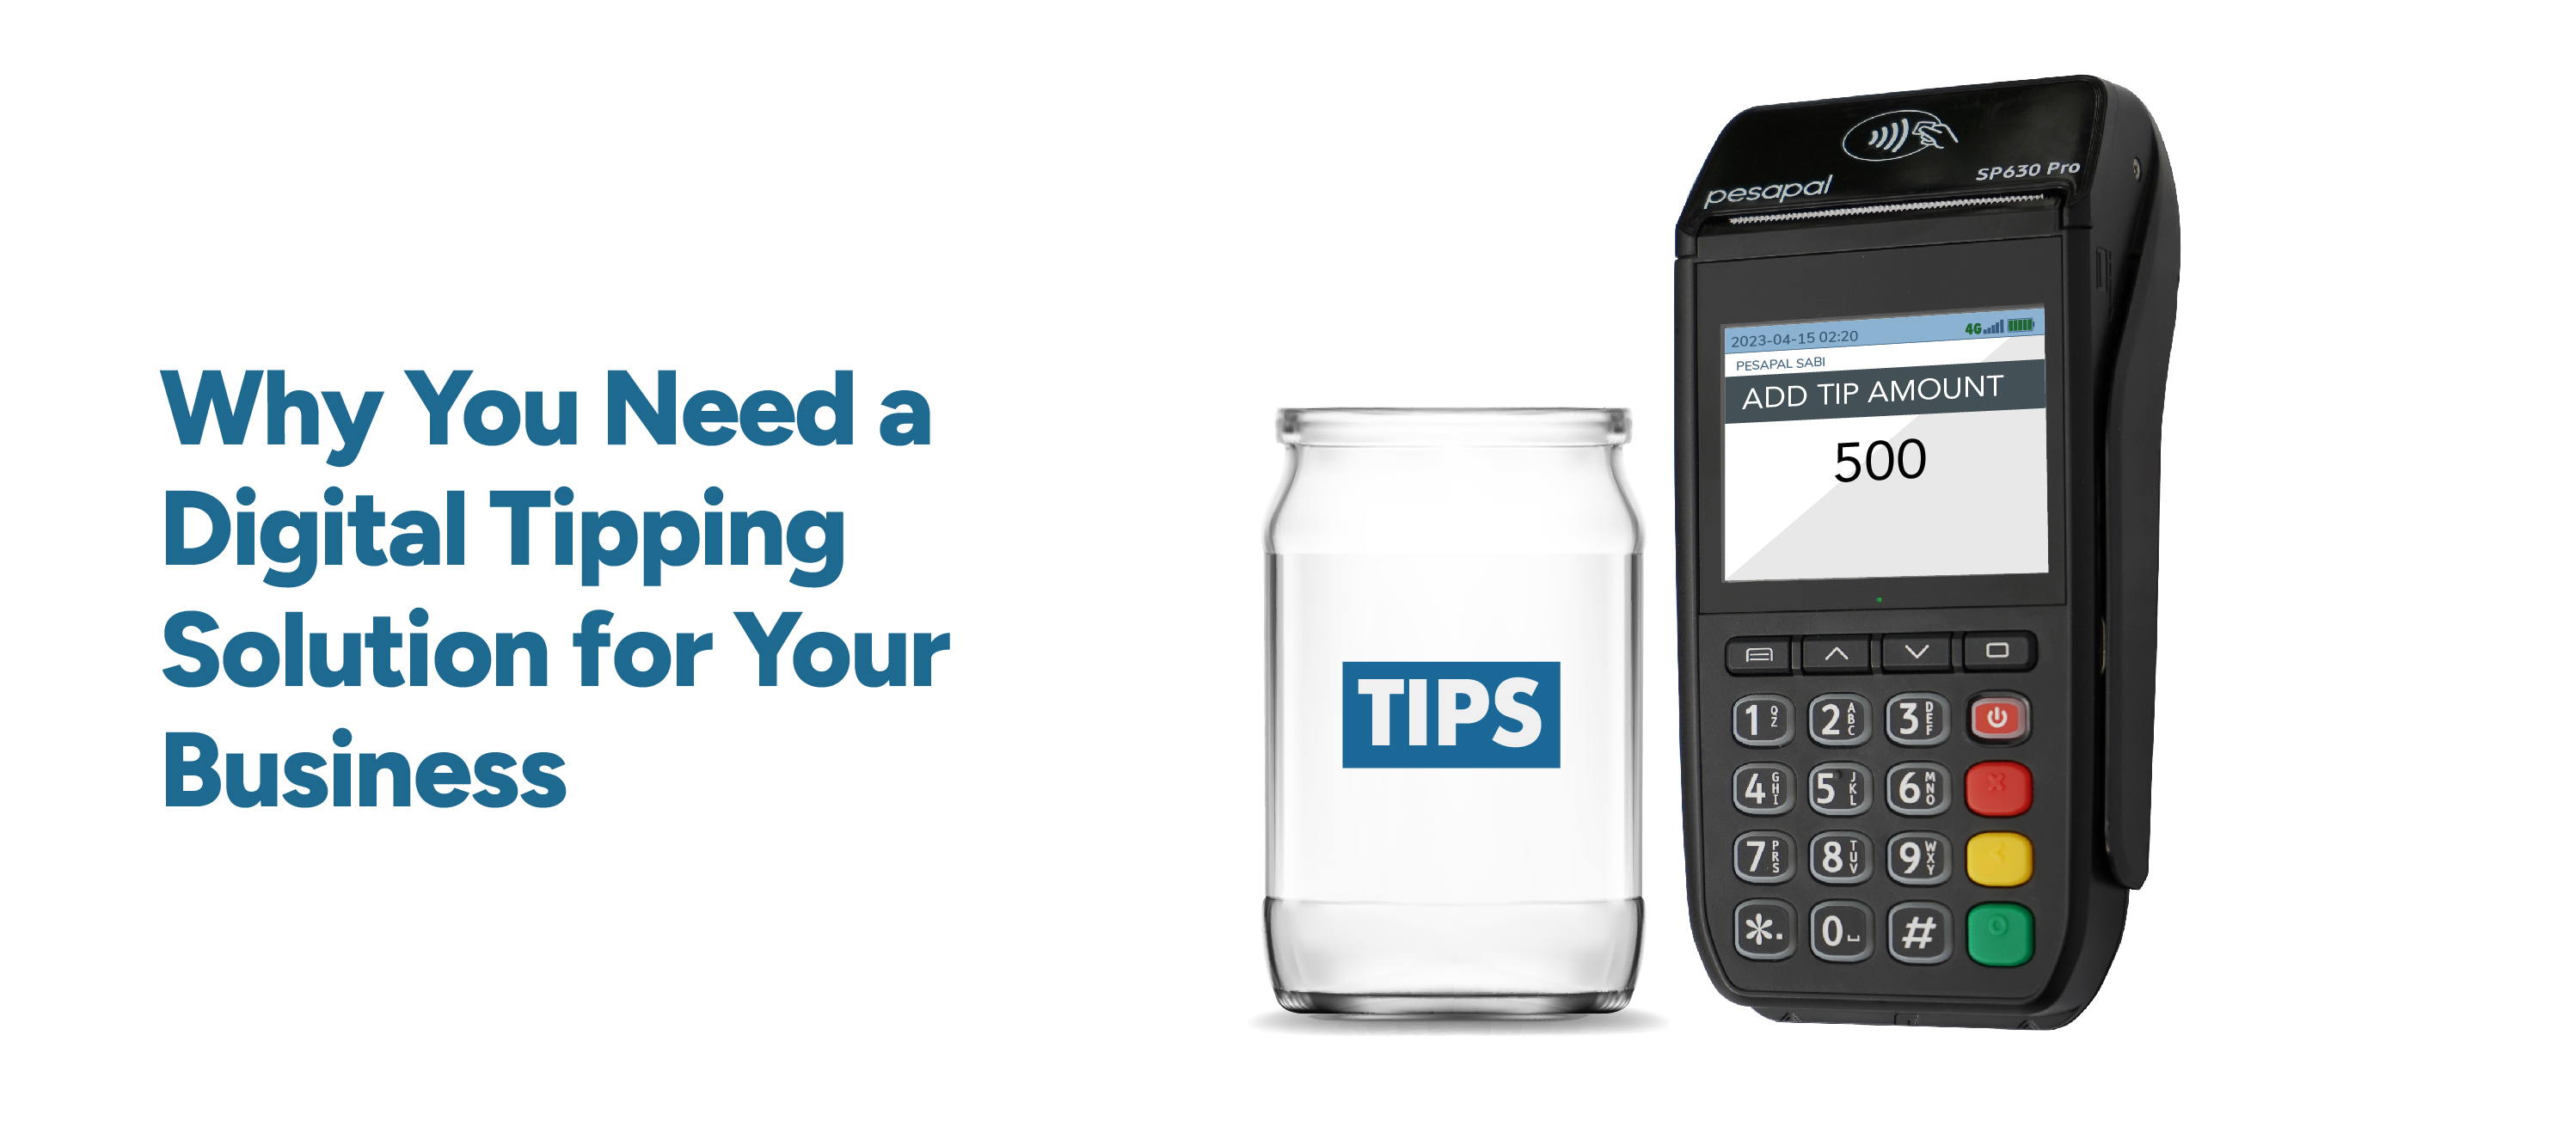 Why You Need a Digital Tipping Solution for Your Business